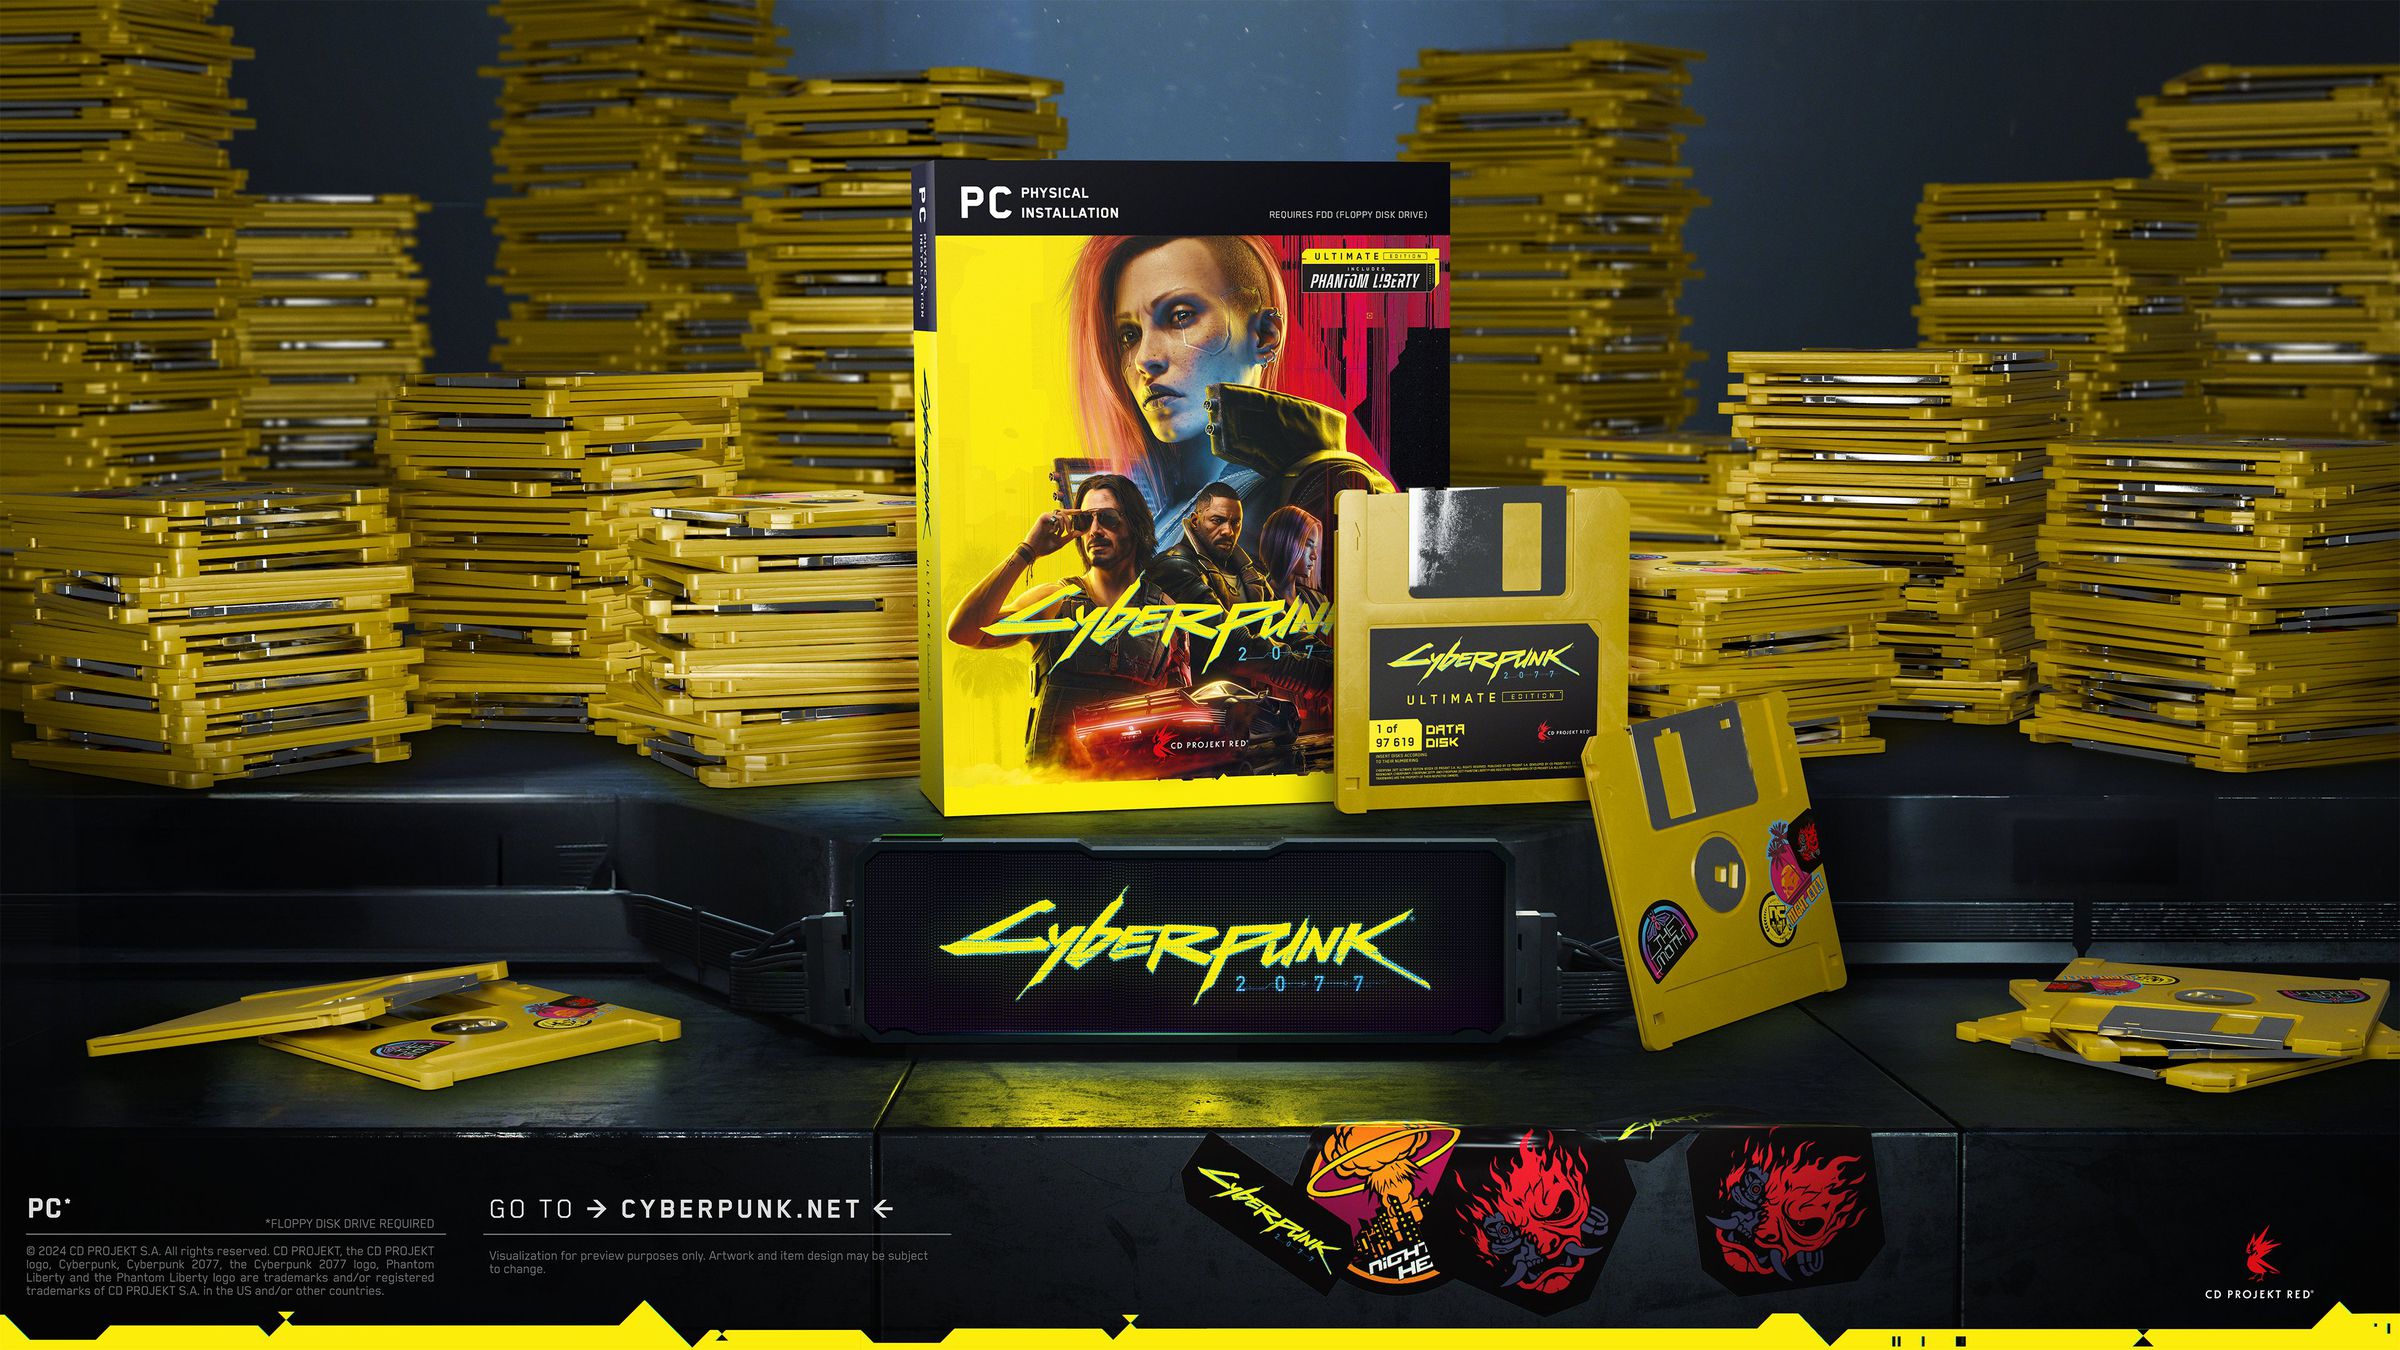 Mockup of CyberPunk 2077 PC game box and thousands of 3.5-inch floppy disks.